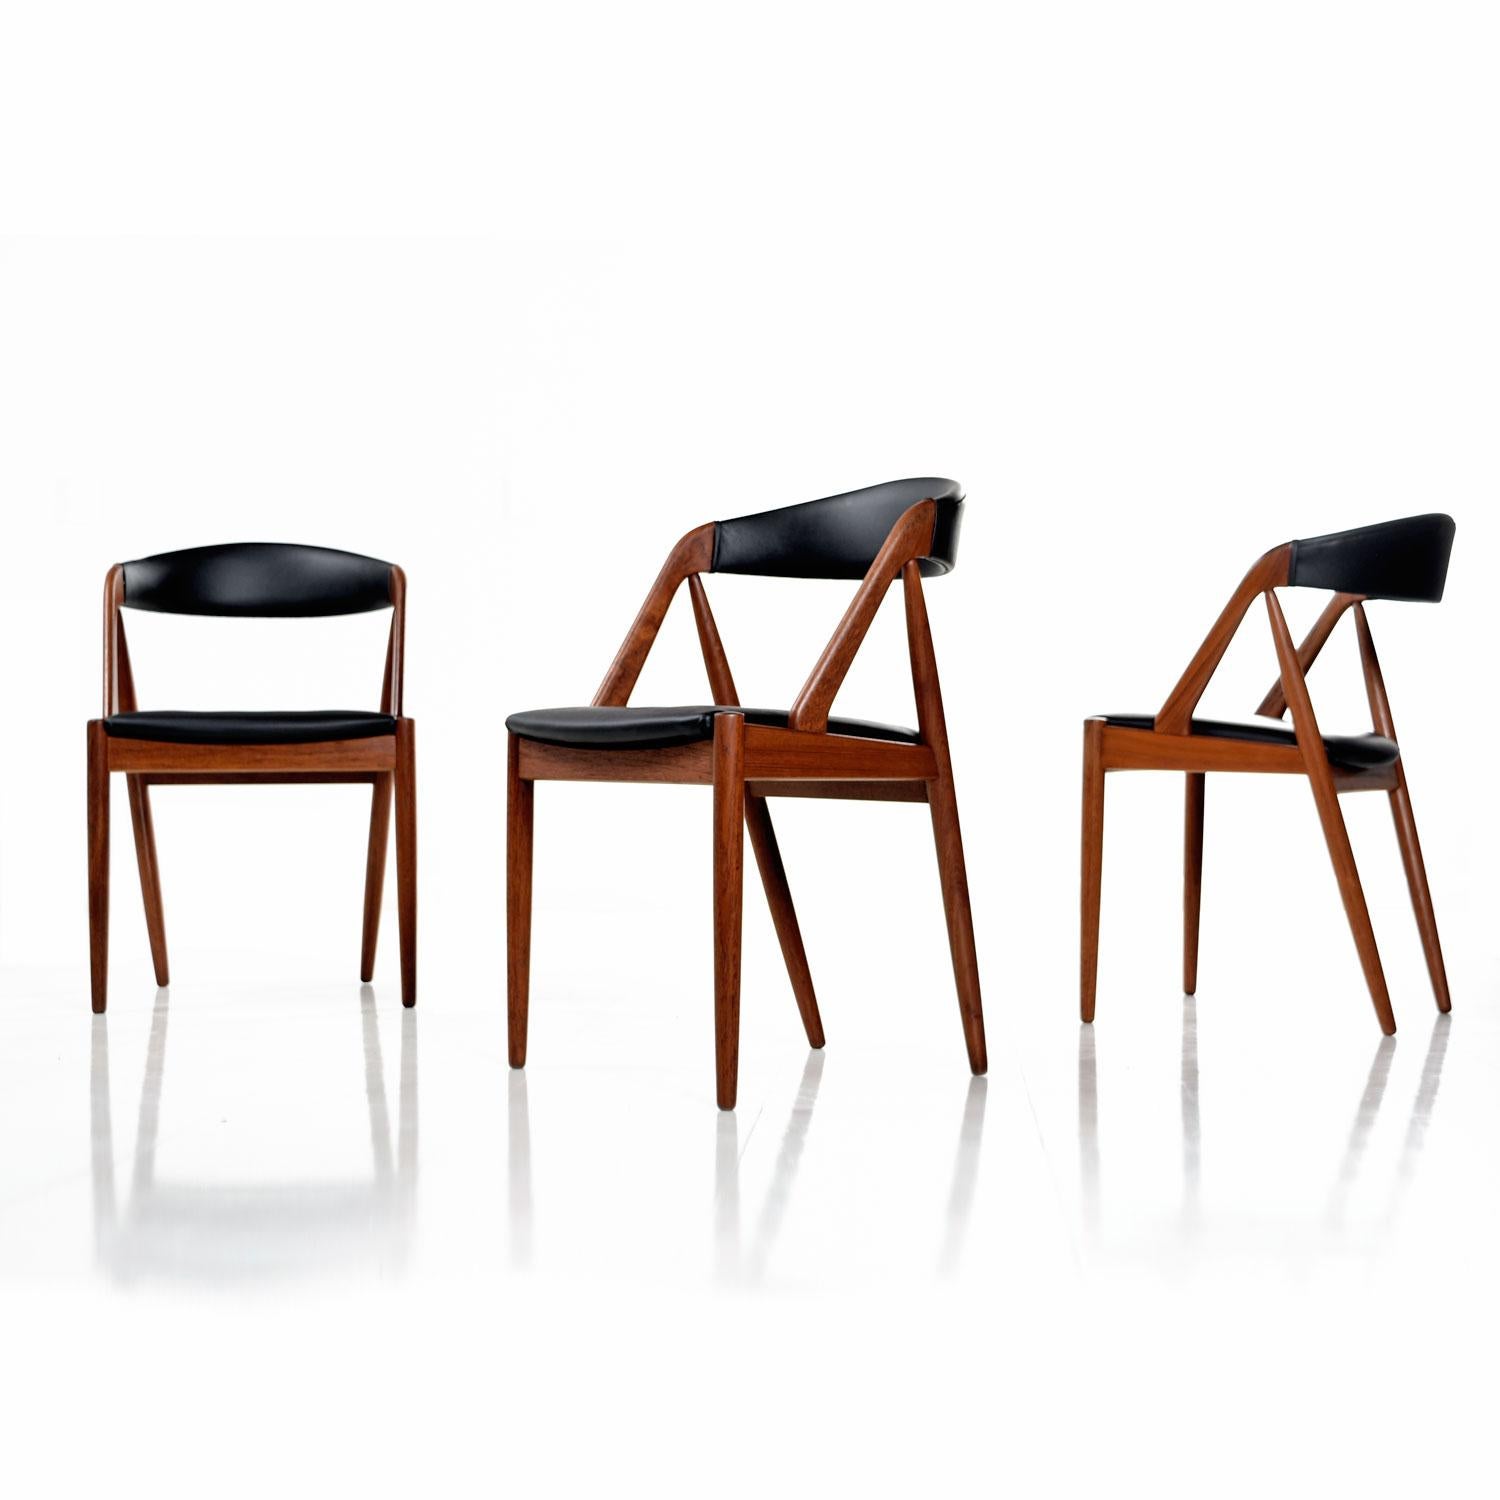 Stunning set of eight, circa 1960s Kai Kristiansen Danish teak chairs model #31 for Schou Andersen. Unmistakable form evidences Kristiansen’s genius. Each chair stands as a work of art, captivating the eye from every angle. Comfortable as they are